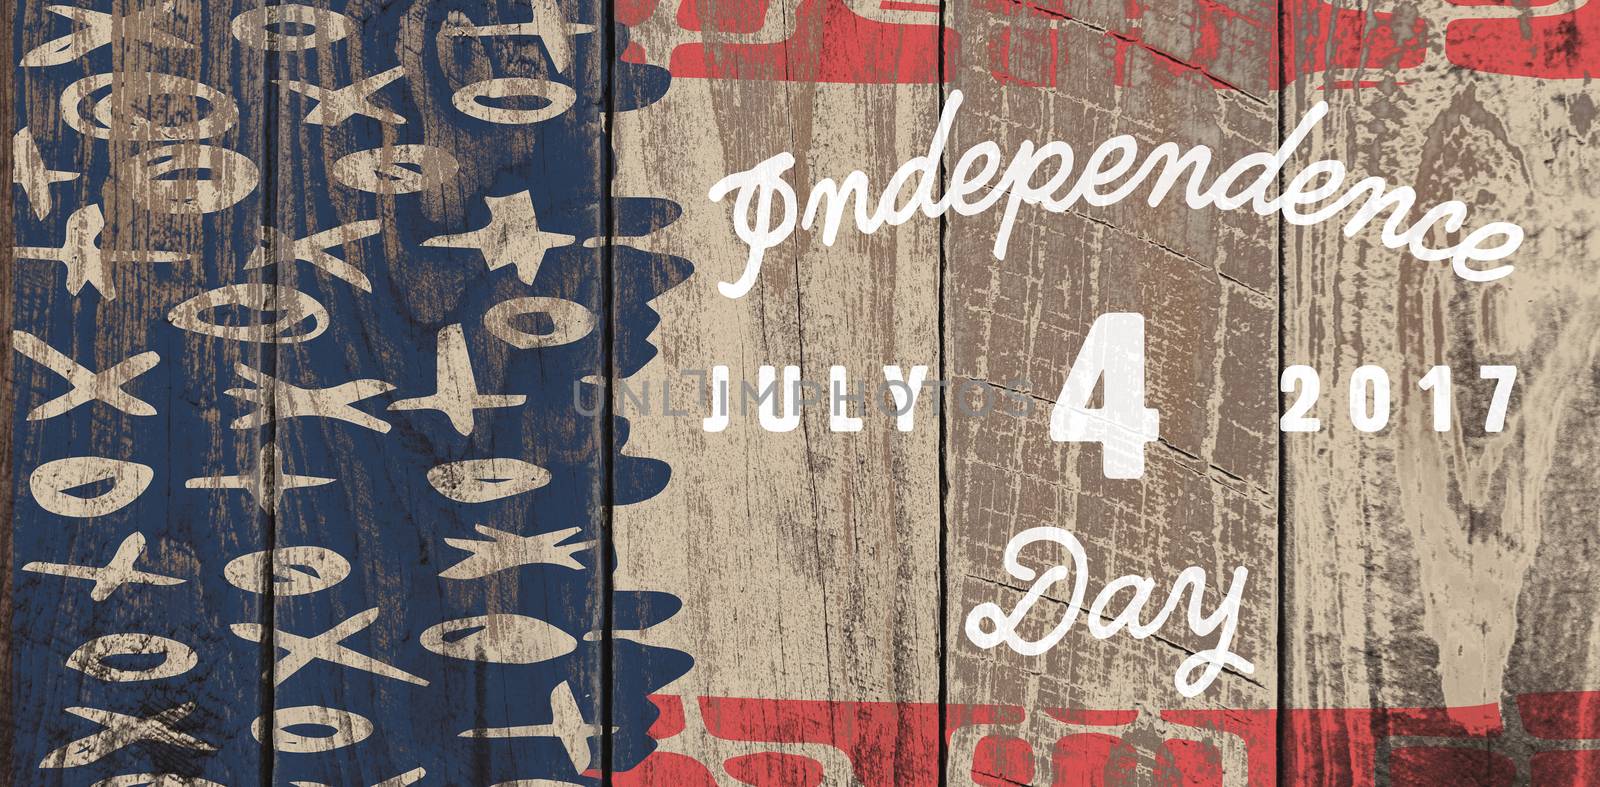 Digitally generated image of happy 4th of july message against wood panelling